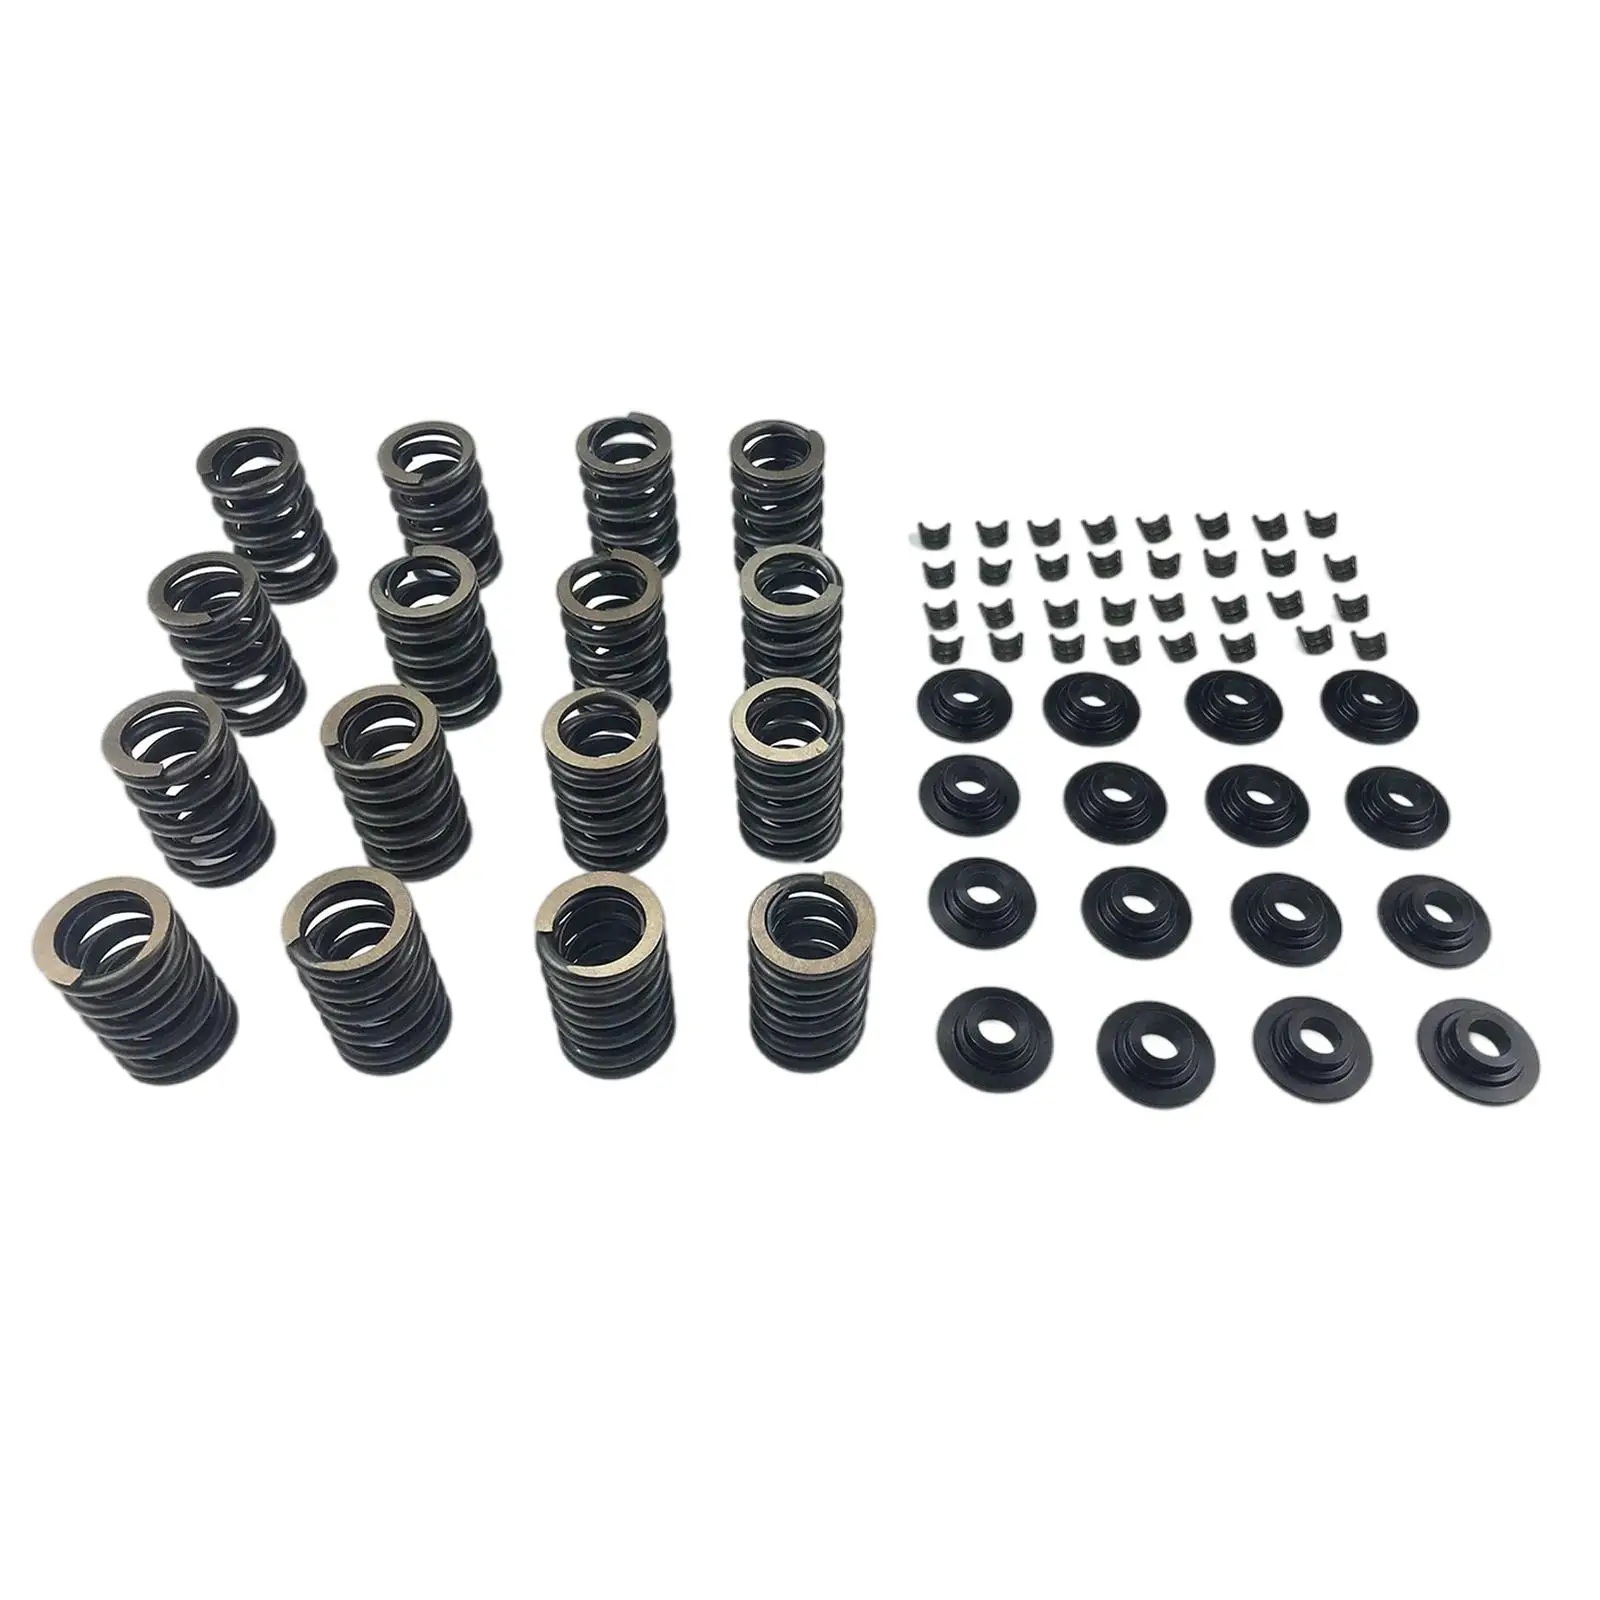 64 Pieces Valve Springs Kit with Retainer & Lock Fits for Chevy Sbc 327 350 400 Components